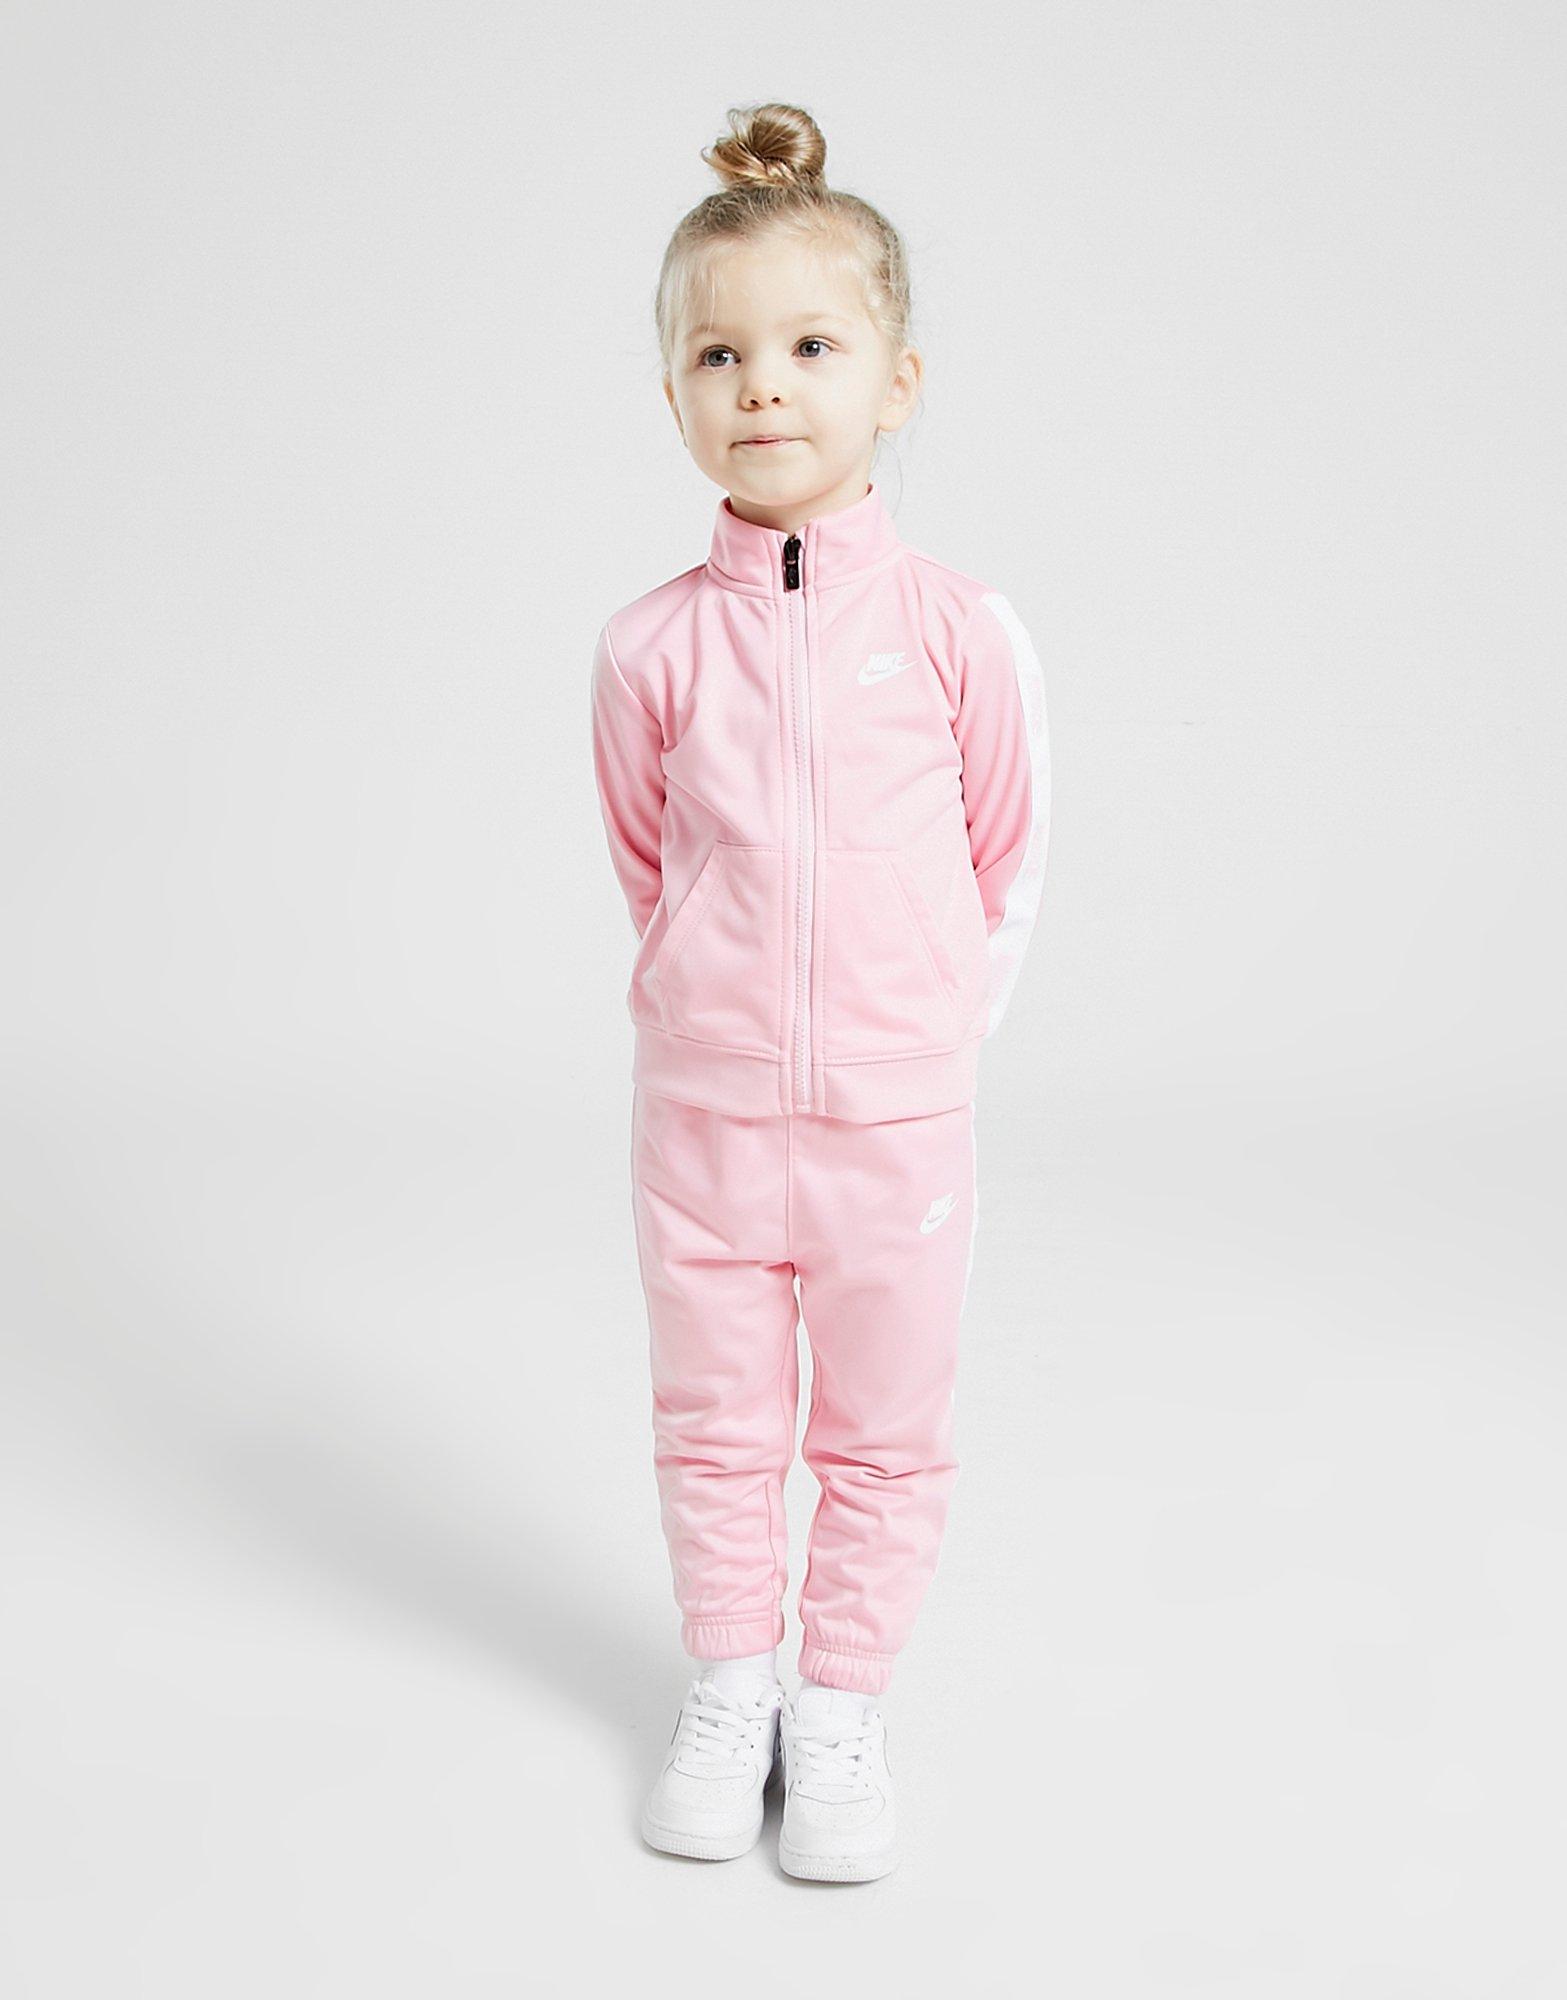 nike tricot tracksuit pink